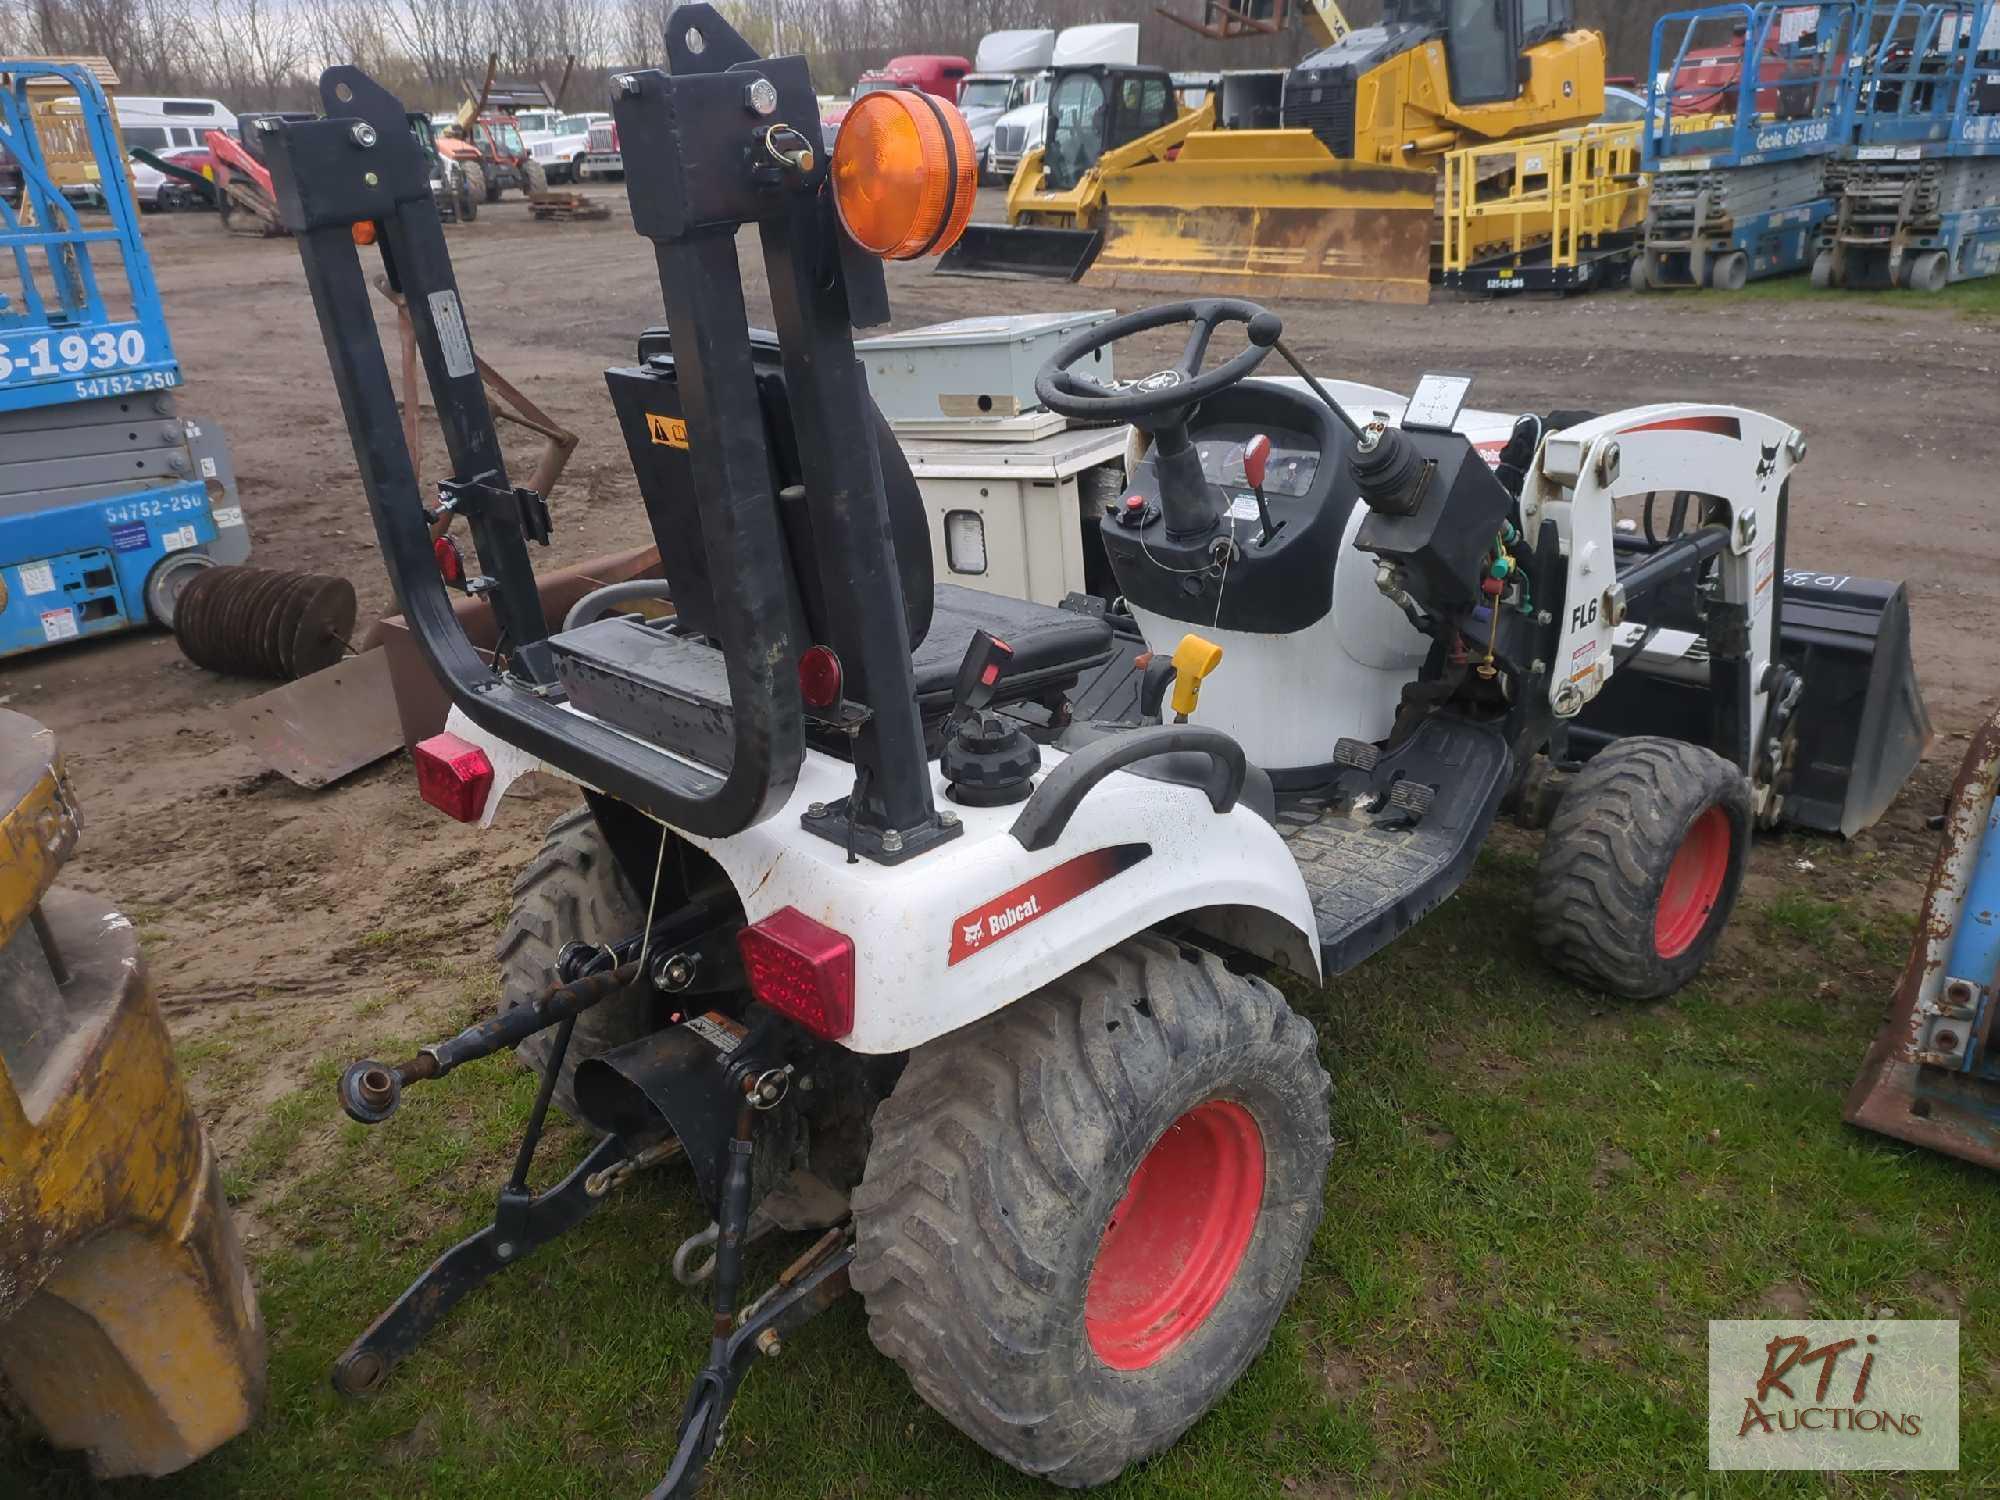 Bobcat CT1025 compact tractor, loader, bucket, 3pt hitch, draw bar, PTO, HST, 4WD, 462 hrs